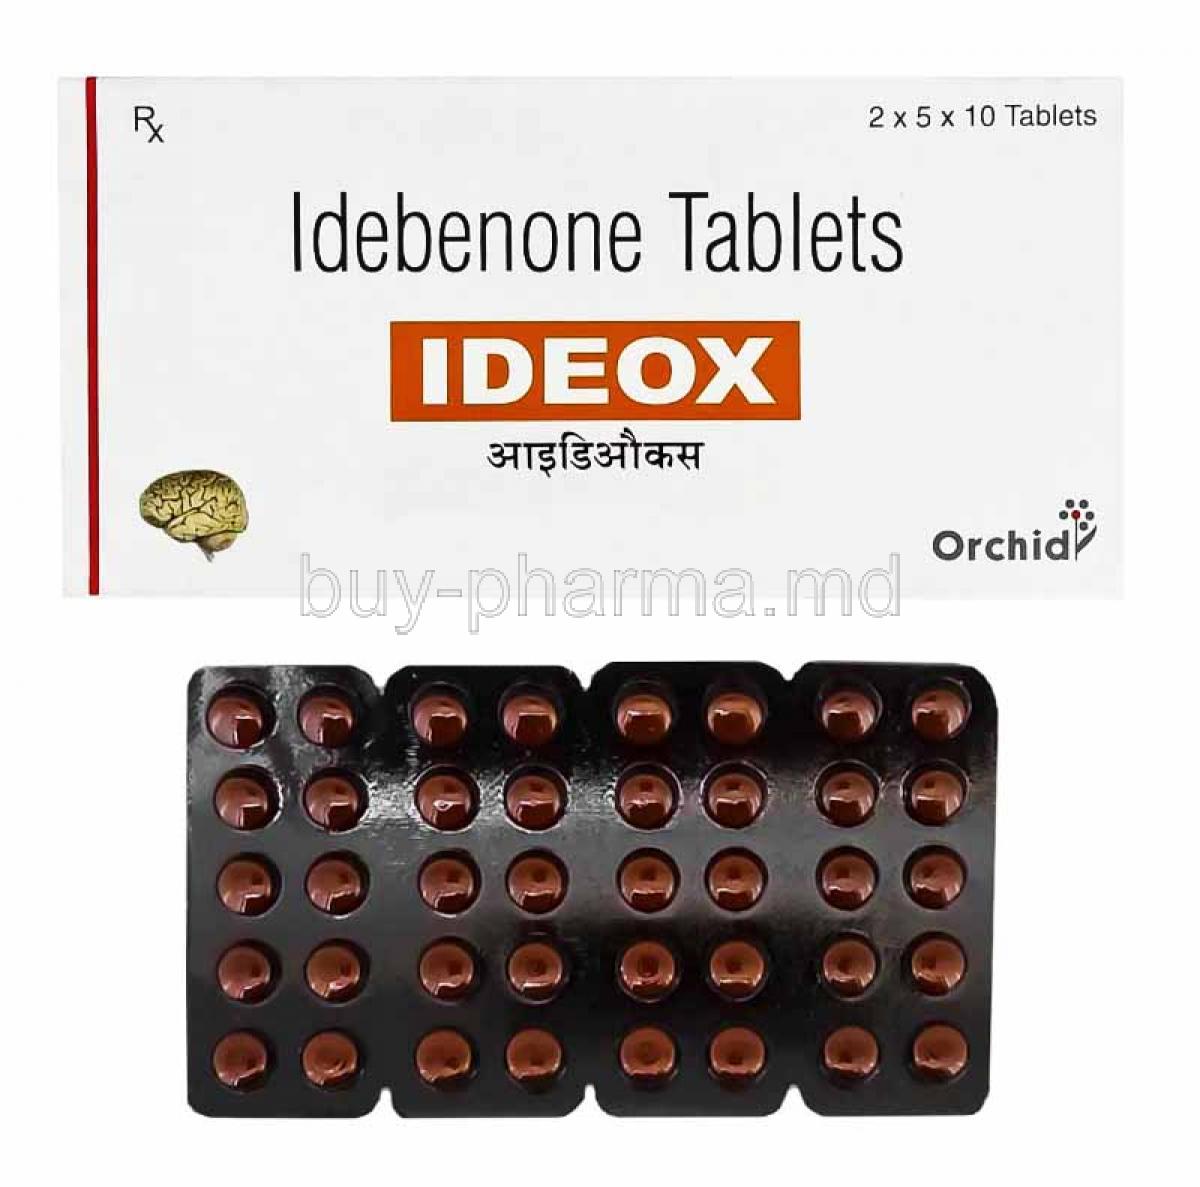 Ideox, Idebenone box and tablets